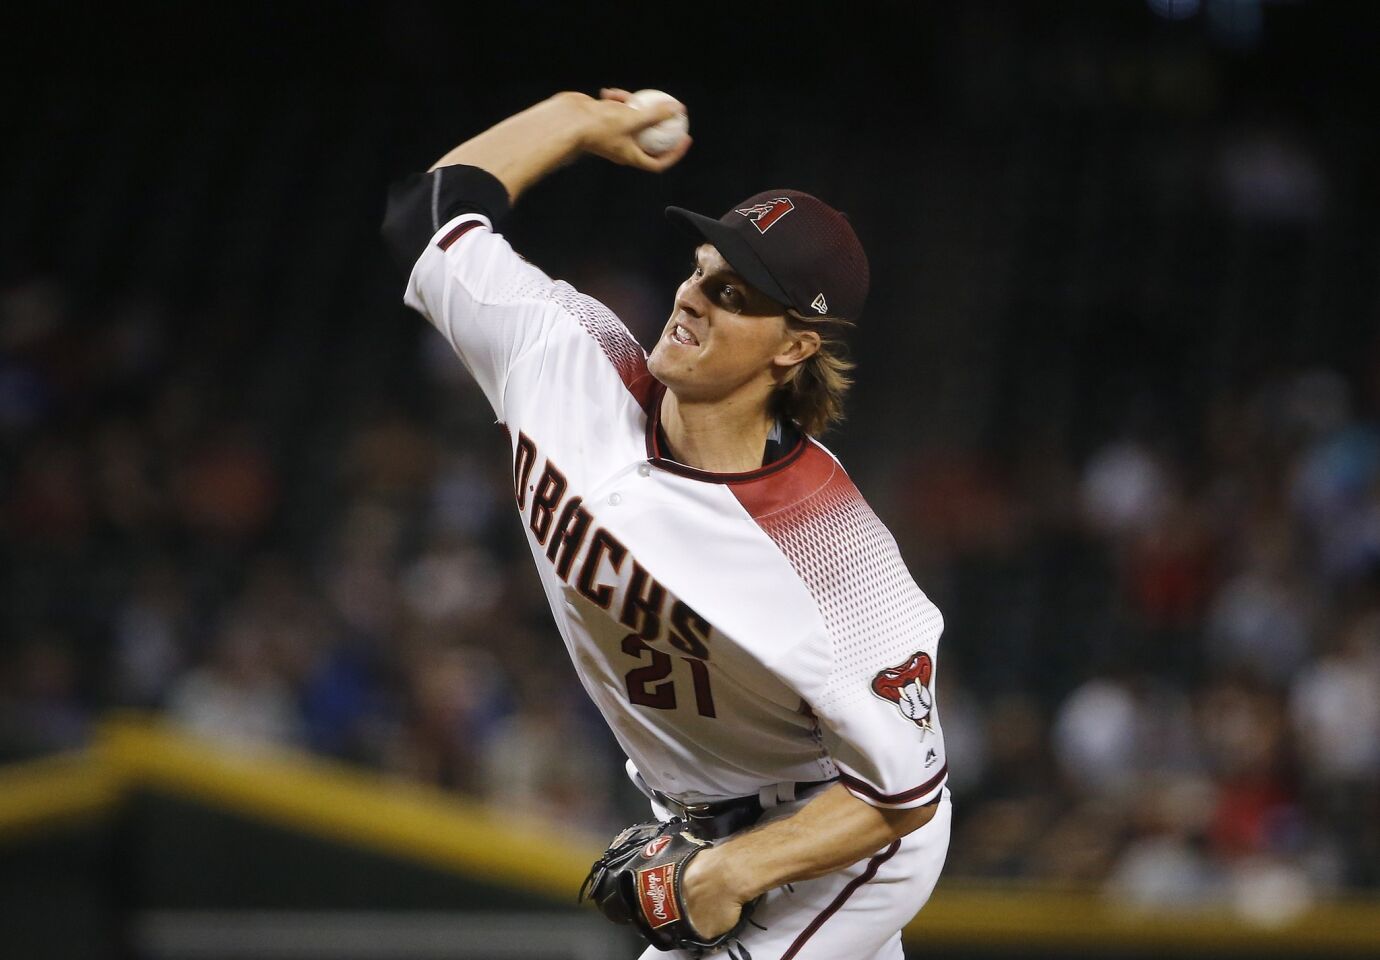 Arizona Diamondbacks starting pitcher Zack Greinke throws to a Los Angeles Dodgers batter during the first inning of a baseball game Wednesday, Sept. 26, 2018, in Phoenix. (AP Photo/Ross D. Franklin)